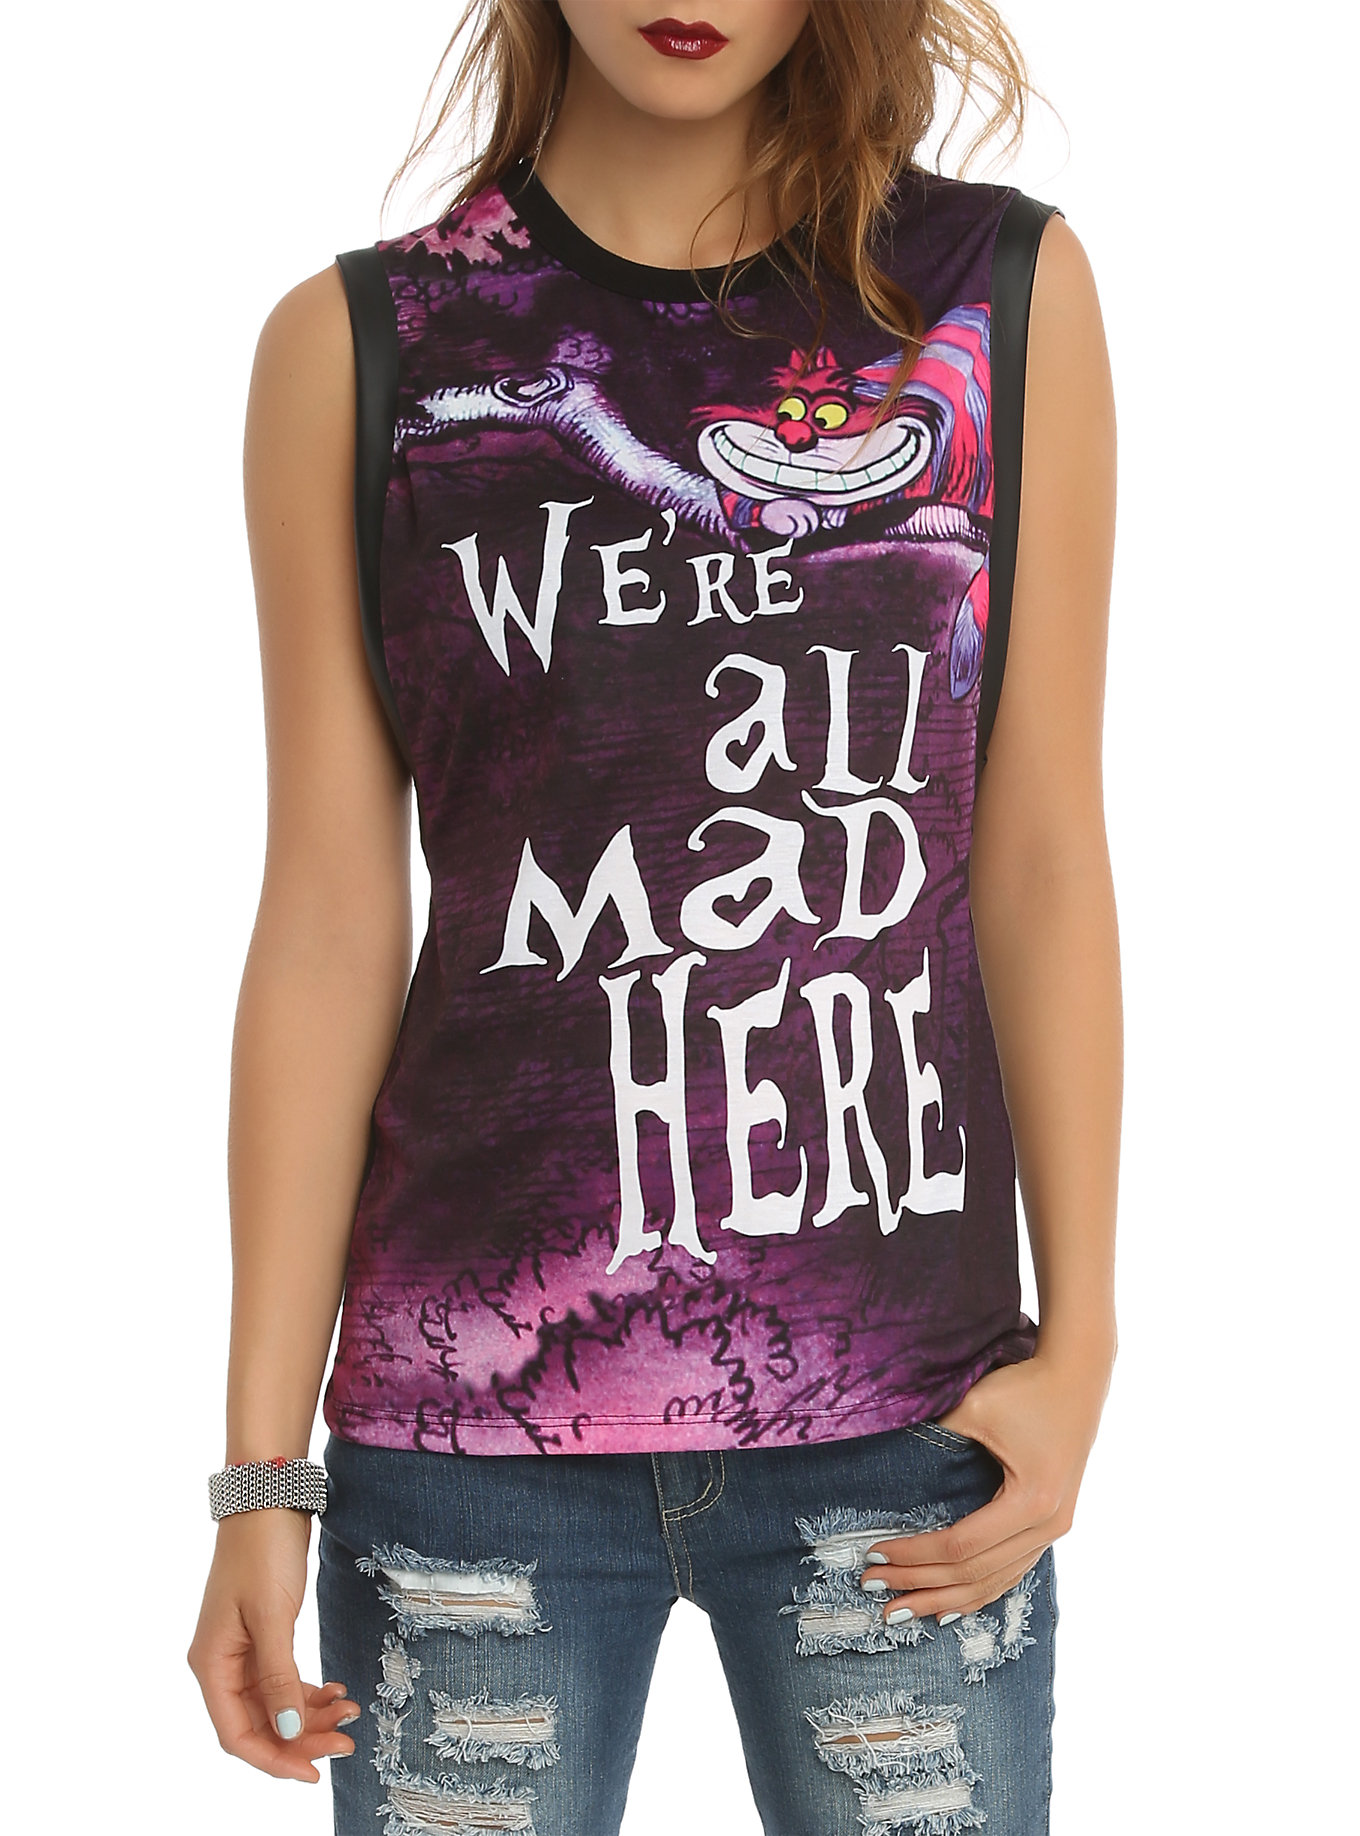 Hot Topic: All Tees $10 + Free Shipping on $50!